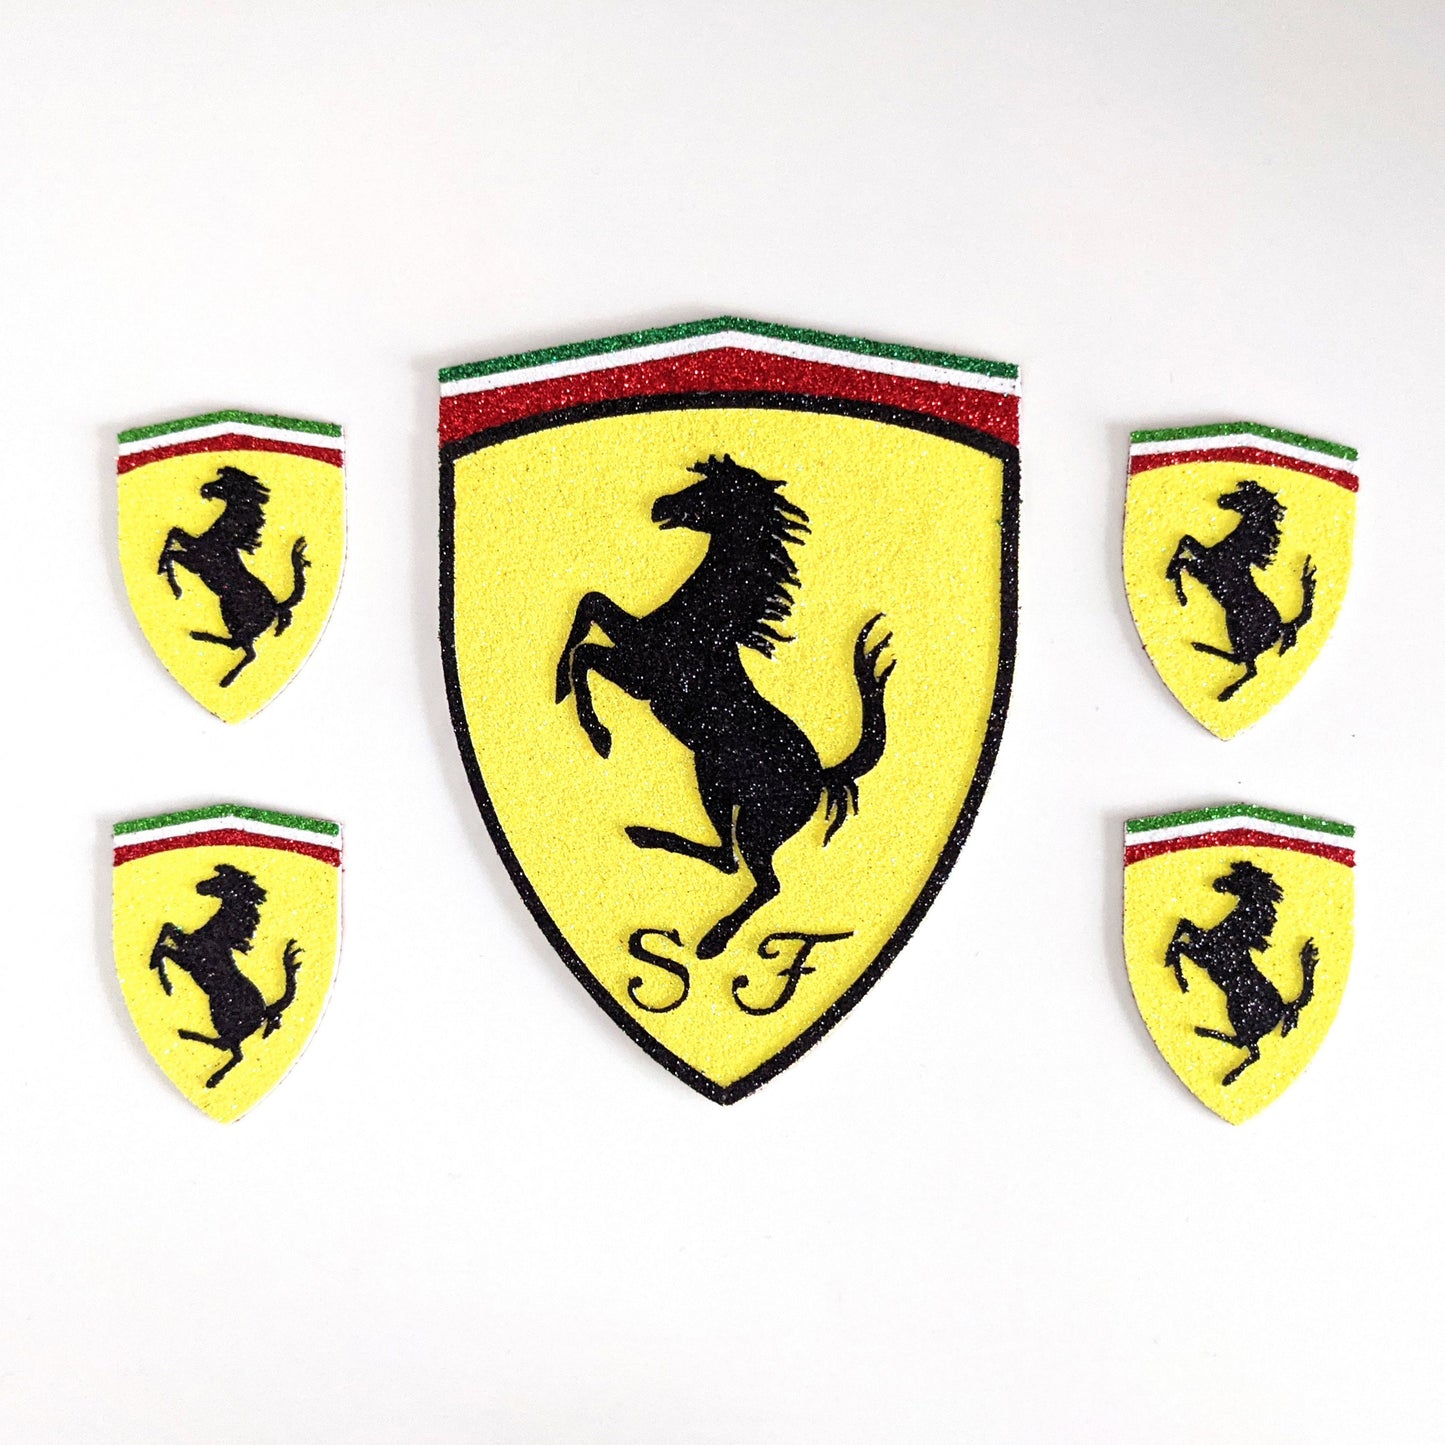 Supercar Cake Topper Decoration Glitter Red and Yellow Non Edible 5.5 x 4 inches Free Delivery